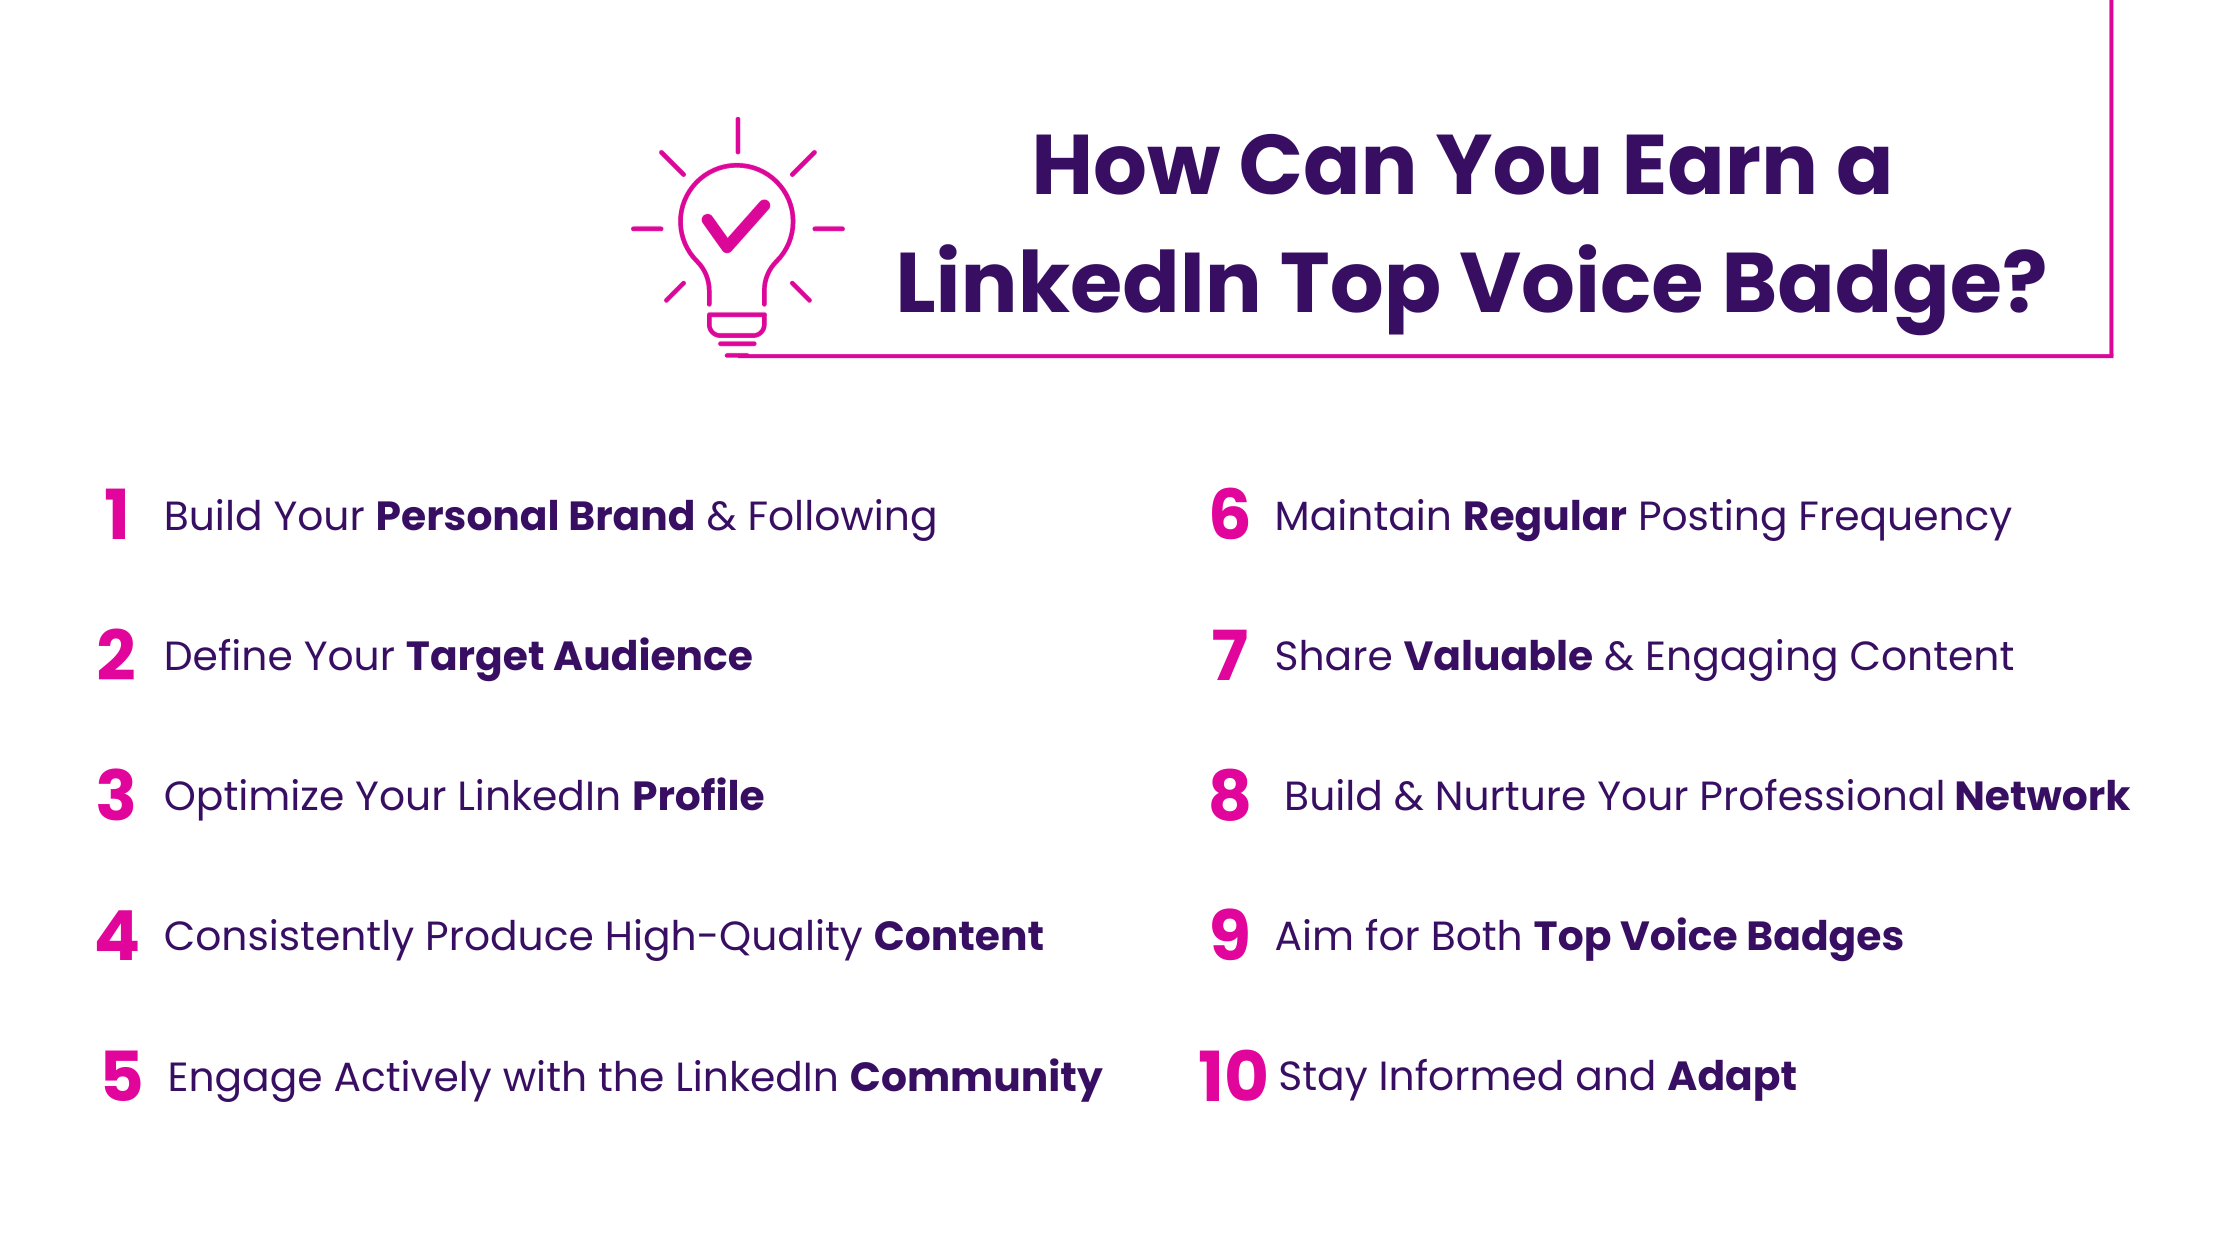 How Can You Earn a LinkedIn Top Voice Badge